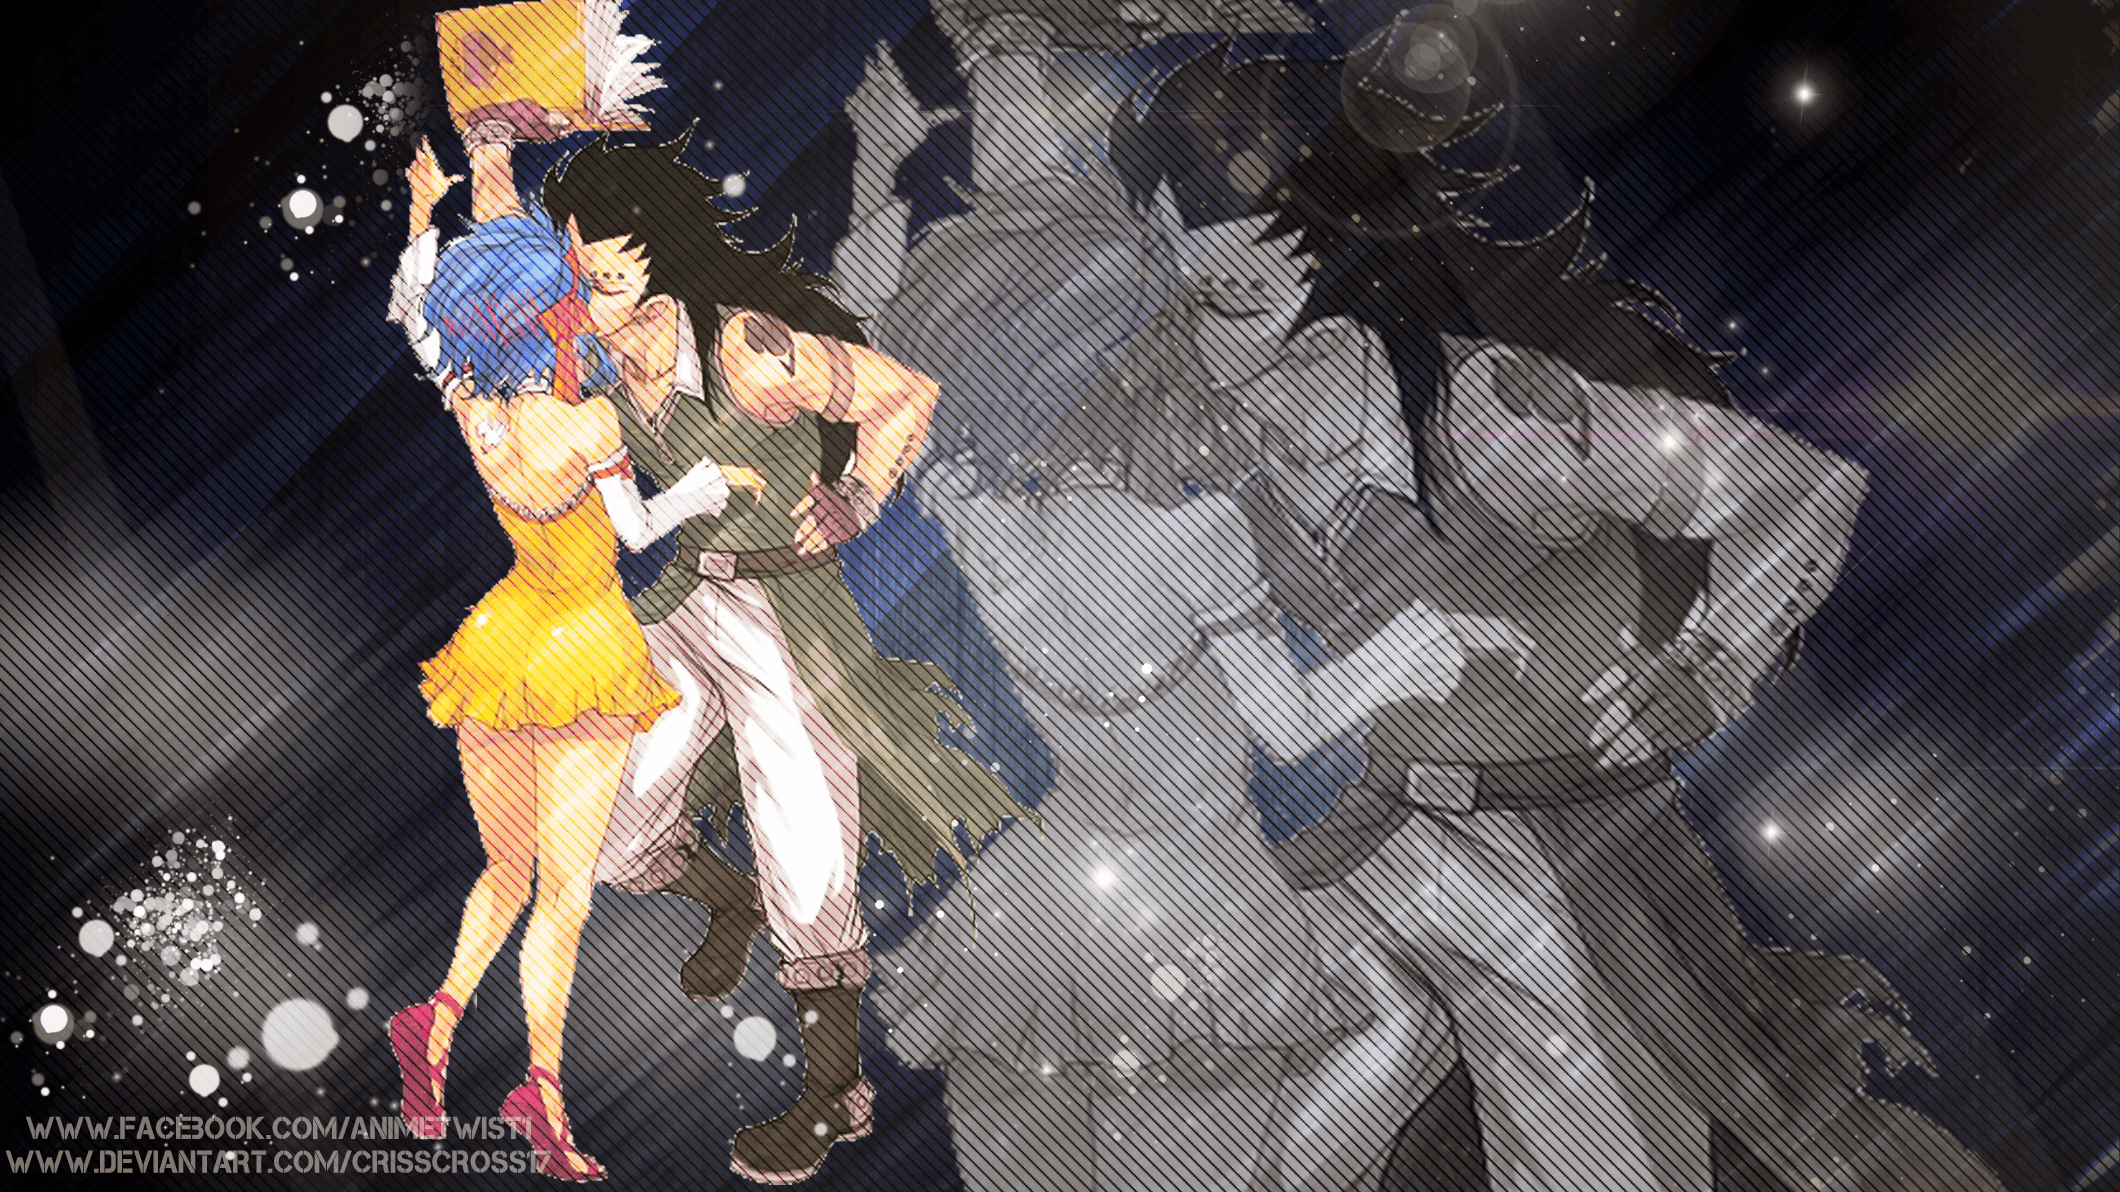 Levy x Gajeel Fairy Tail Wallpapers by Crisscross17.